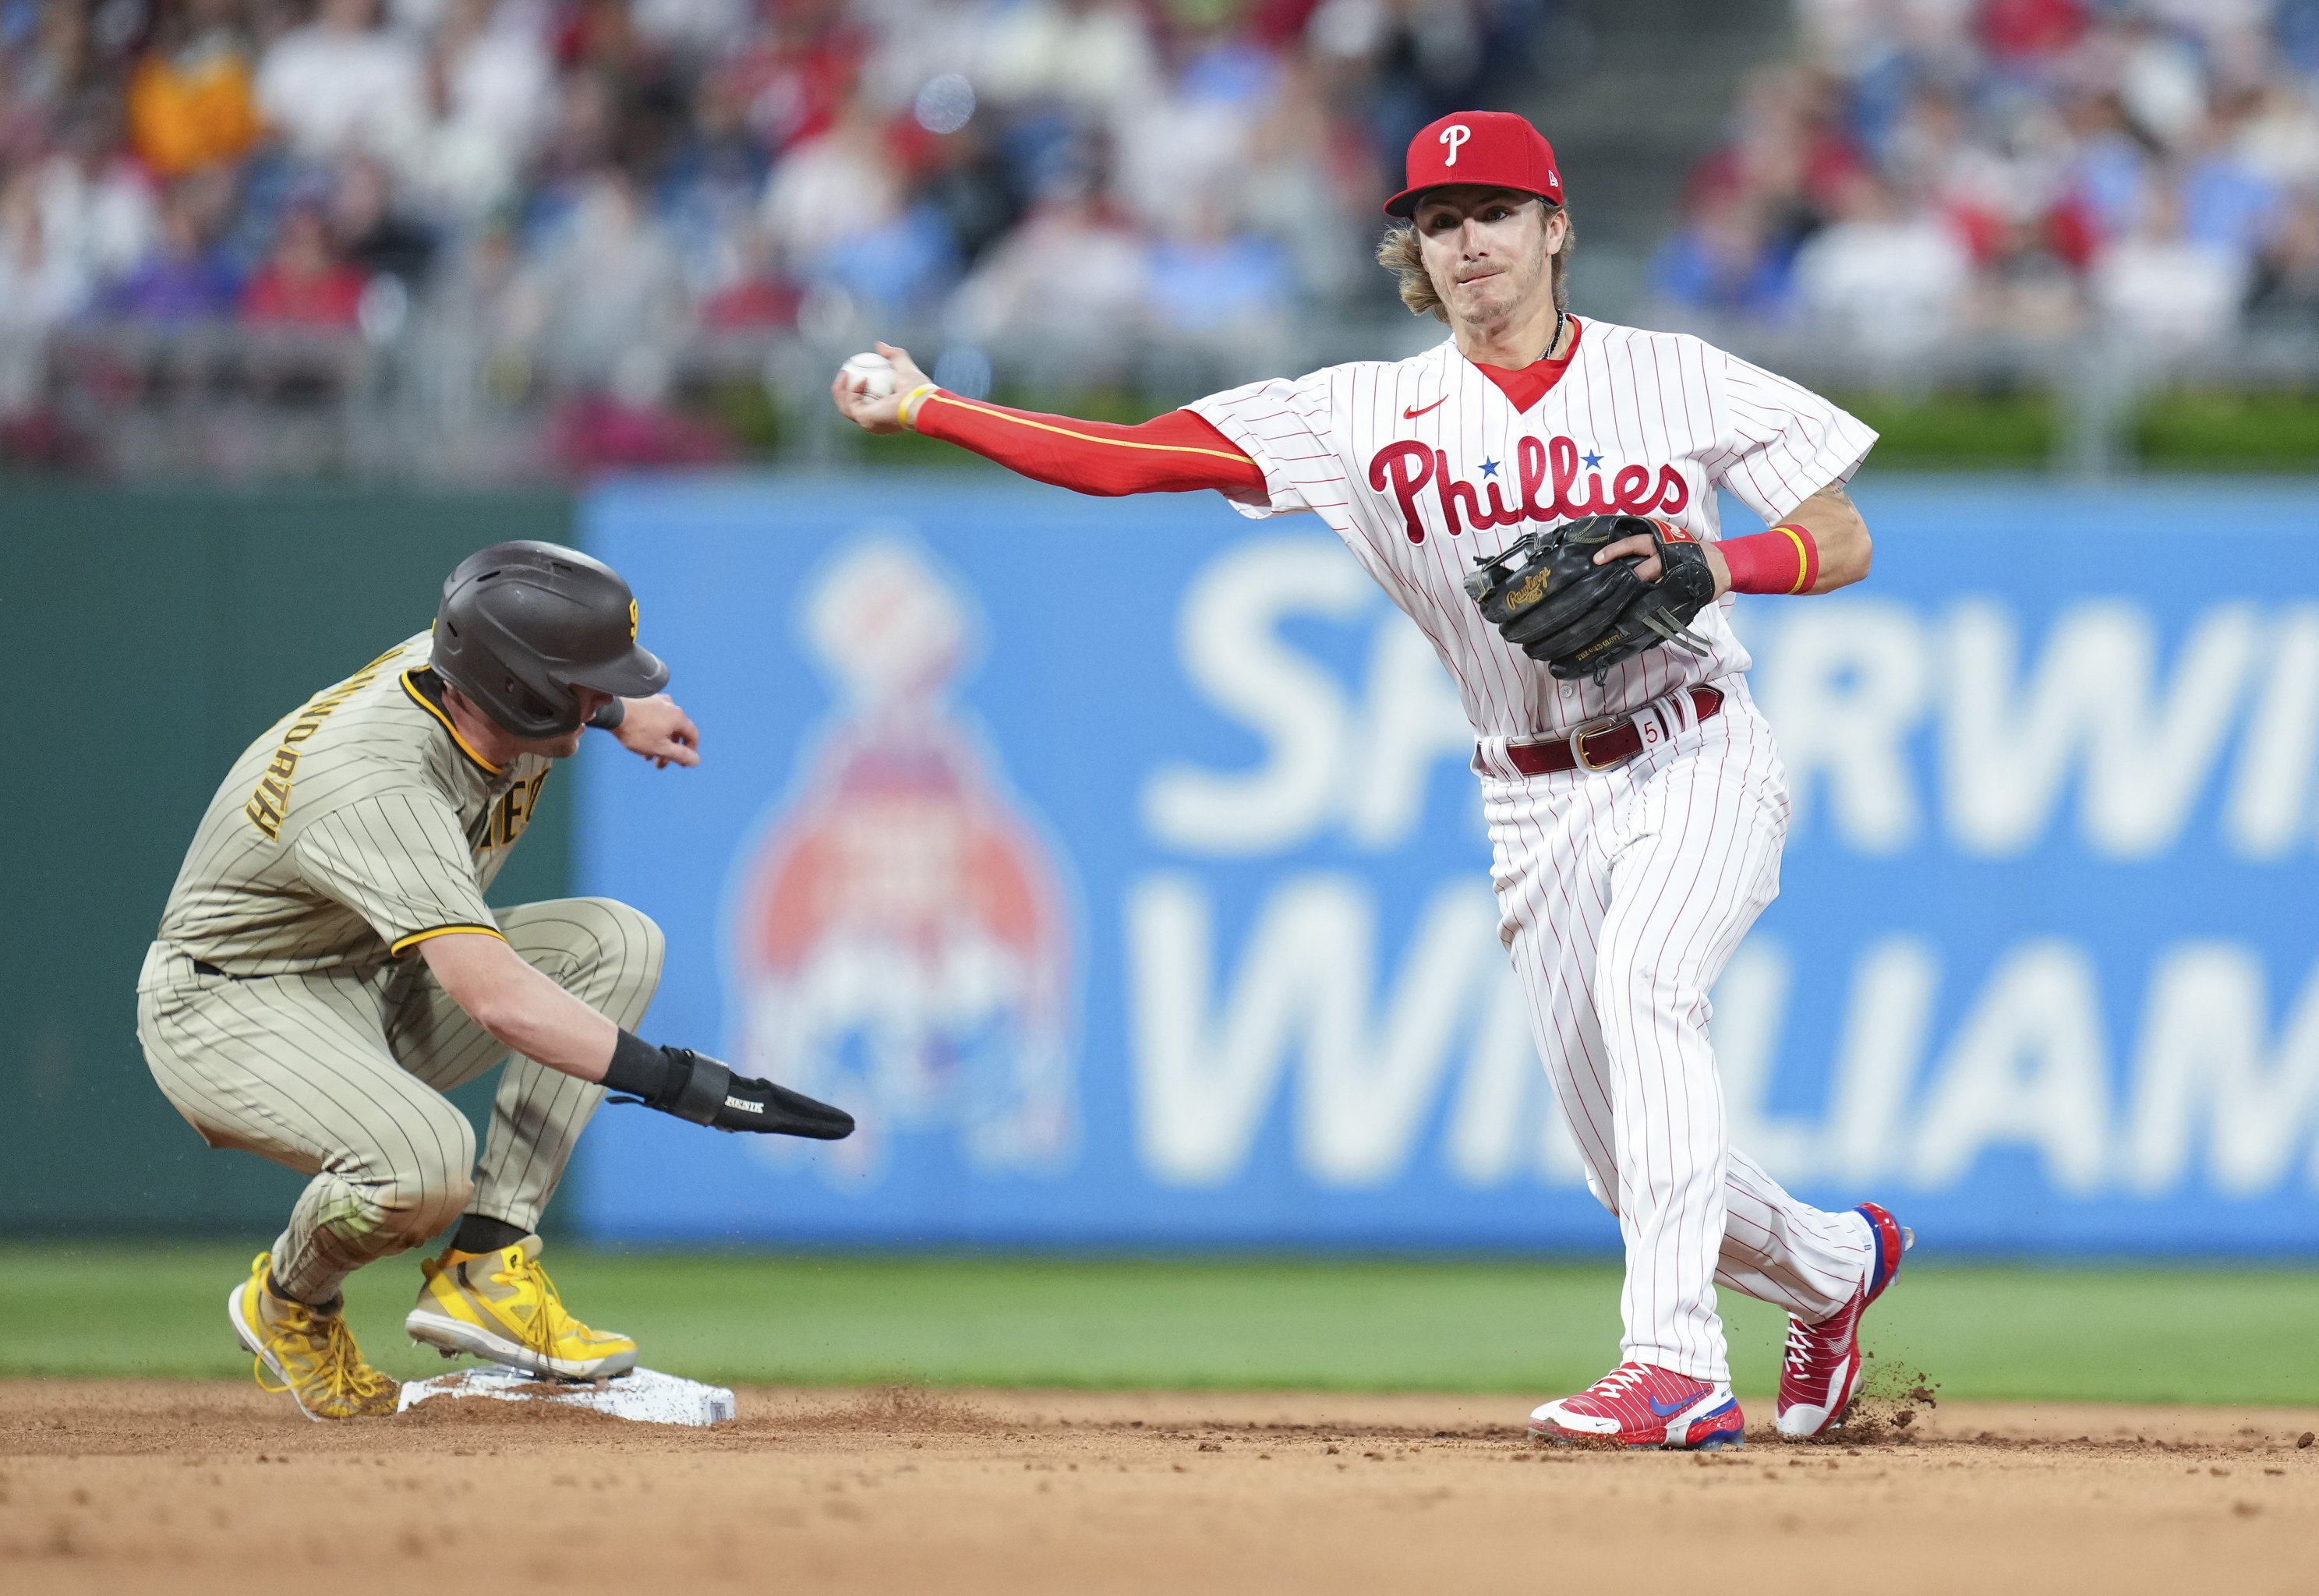 Could Marcelo Mayer be Red Sox' version of Phillies shortstop Bryson Stott